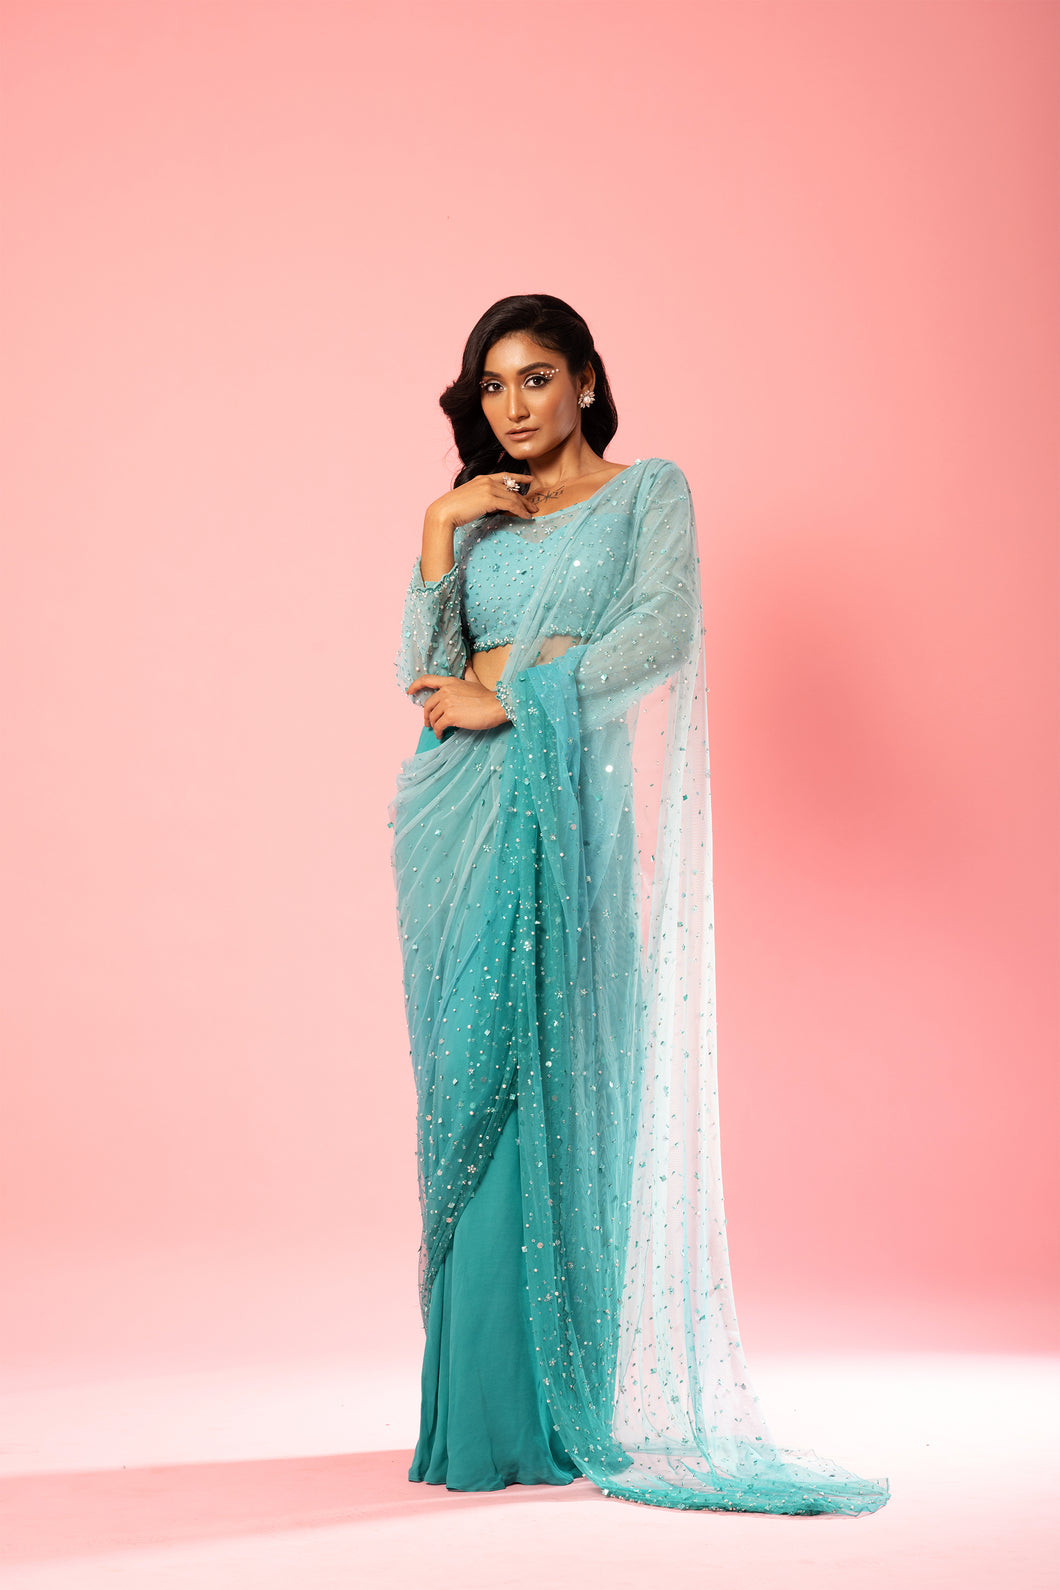 Featuring a Teal and powder blue ombre  pre-stitched saree